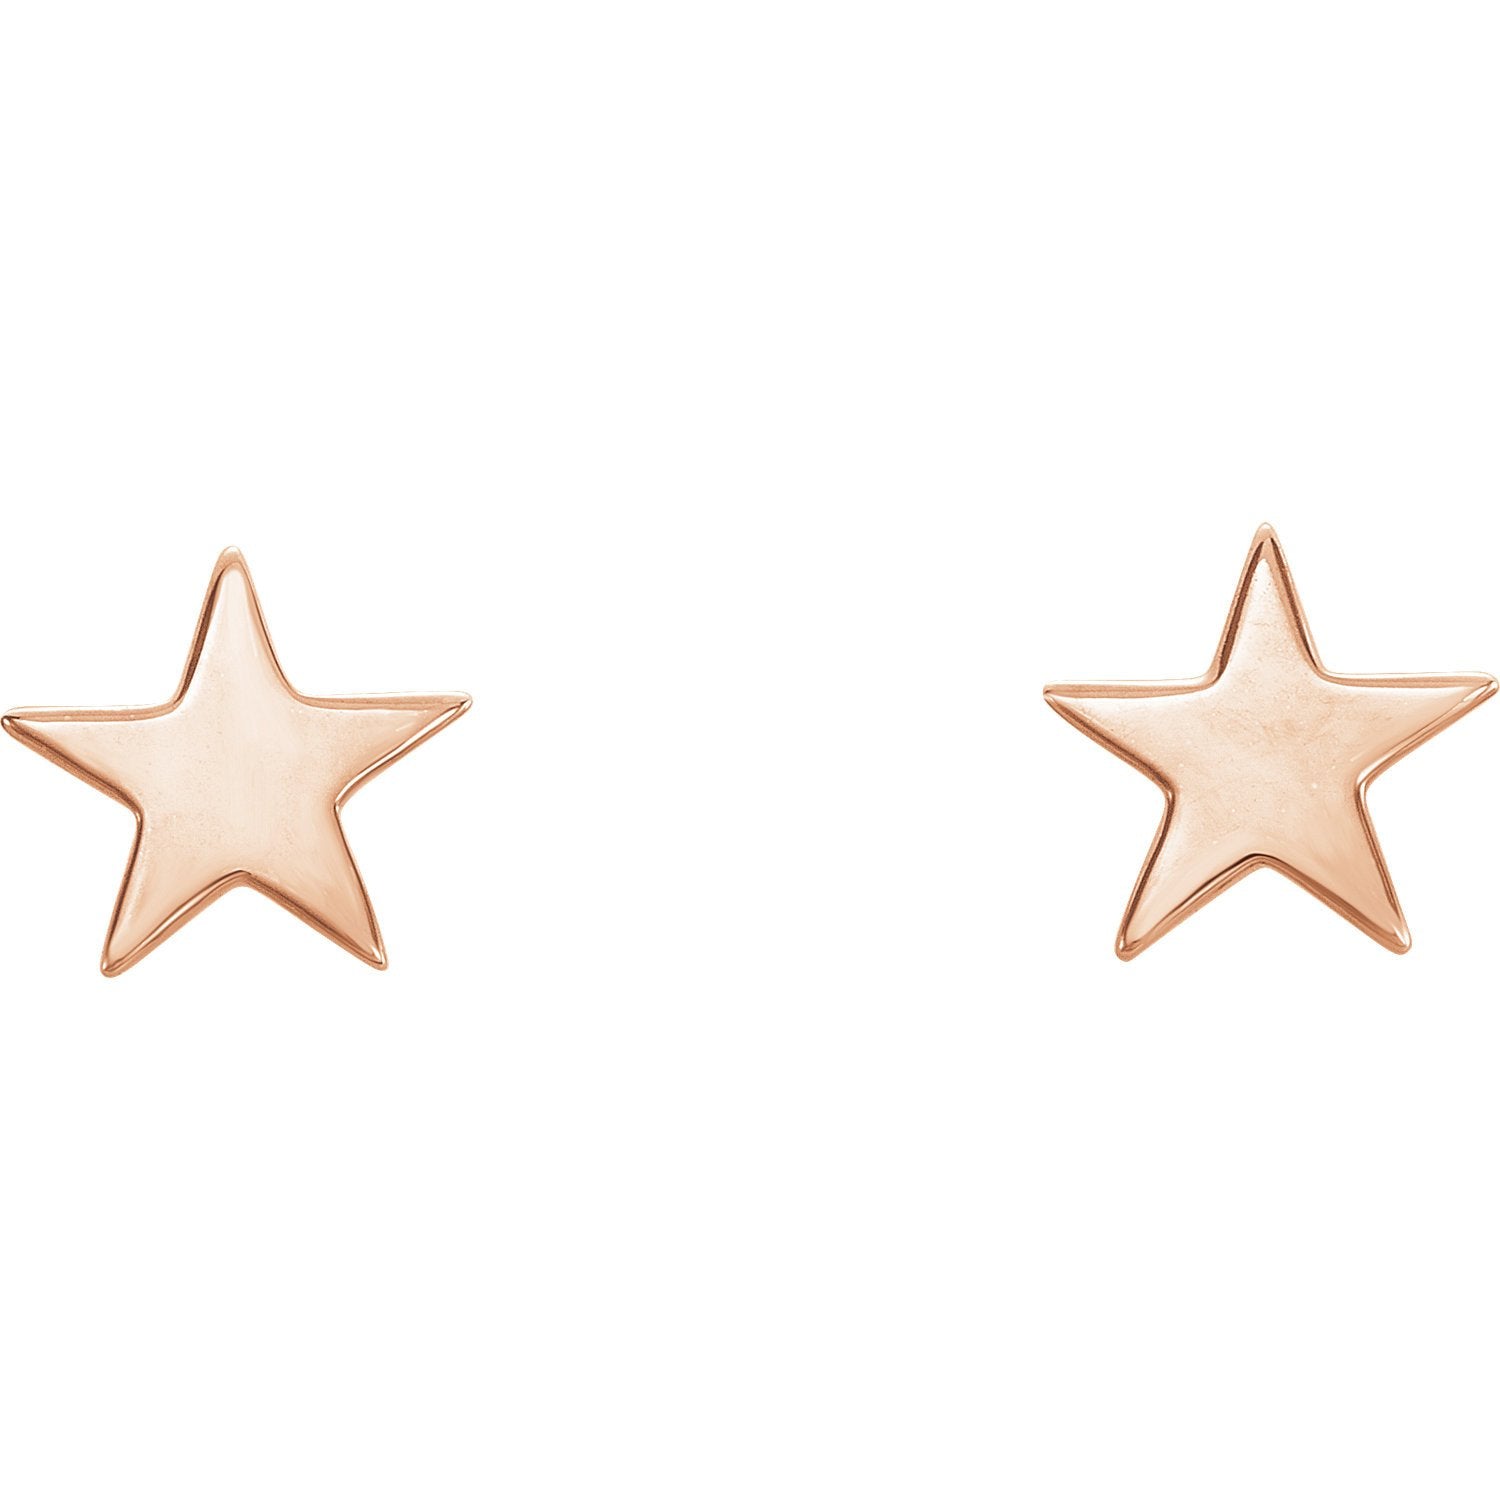 Star Cutout Earrings with Backs - 14K Gold (Y, W or R), Platinum, or Sterling Silver